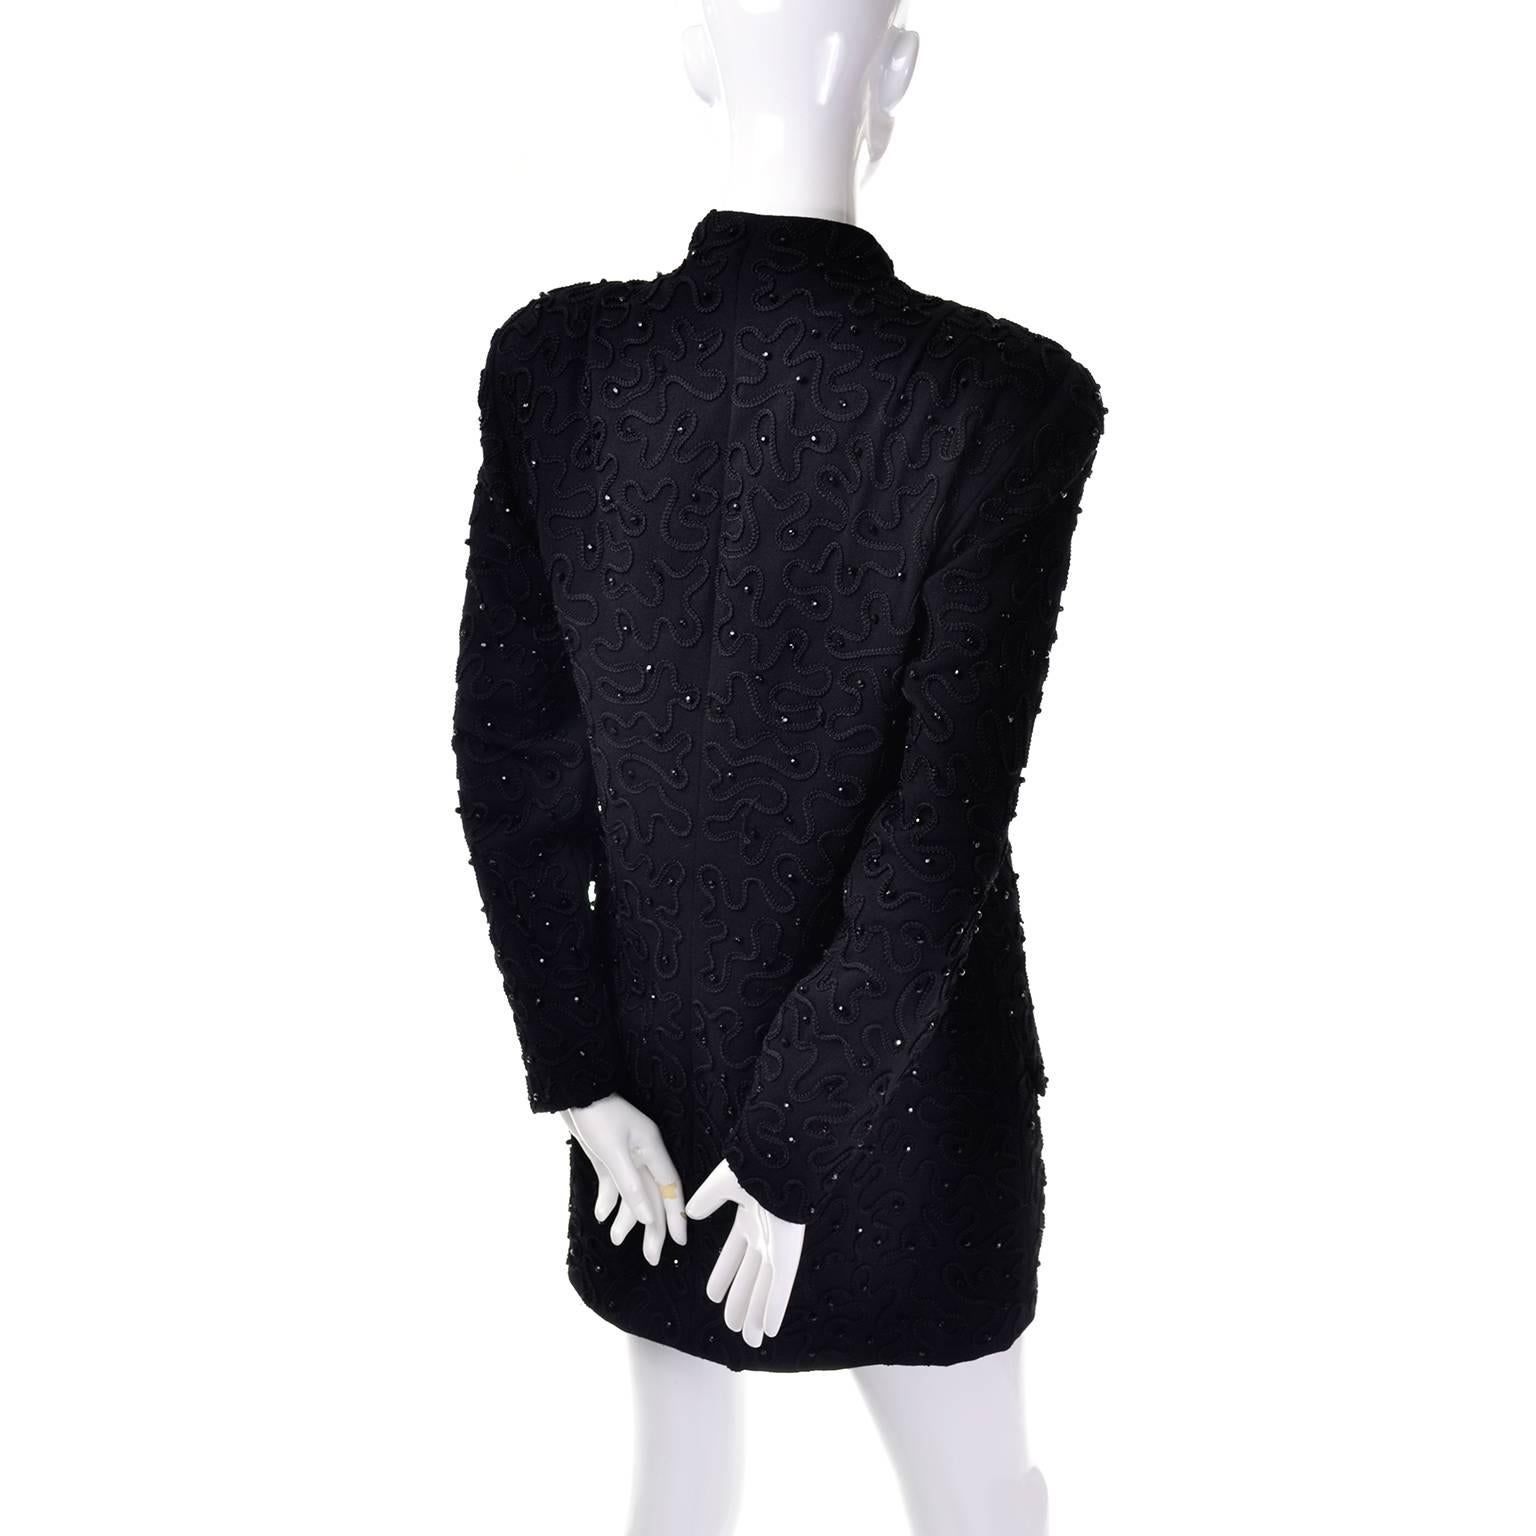 This is a gorgeous 1980's black Donna Karan New York Wool Blazer Jacket with beading and swirl raised embroidered design. Decorative buttons run down the front of this jacket, with hidden snap closures underneath. There are shoulder pads and long